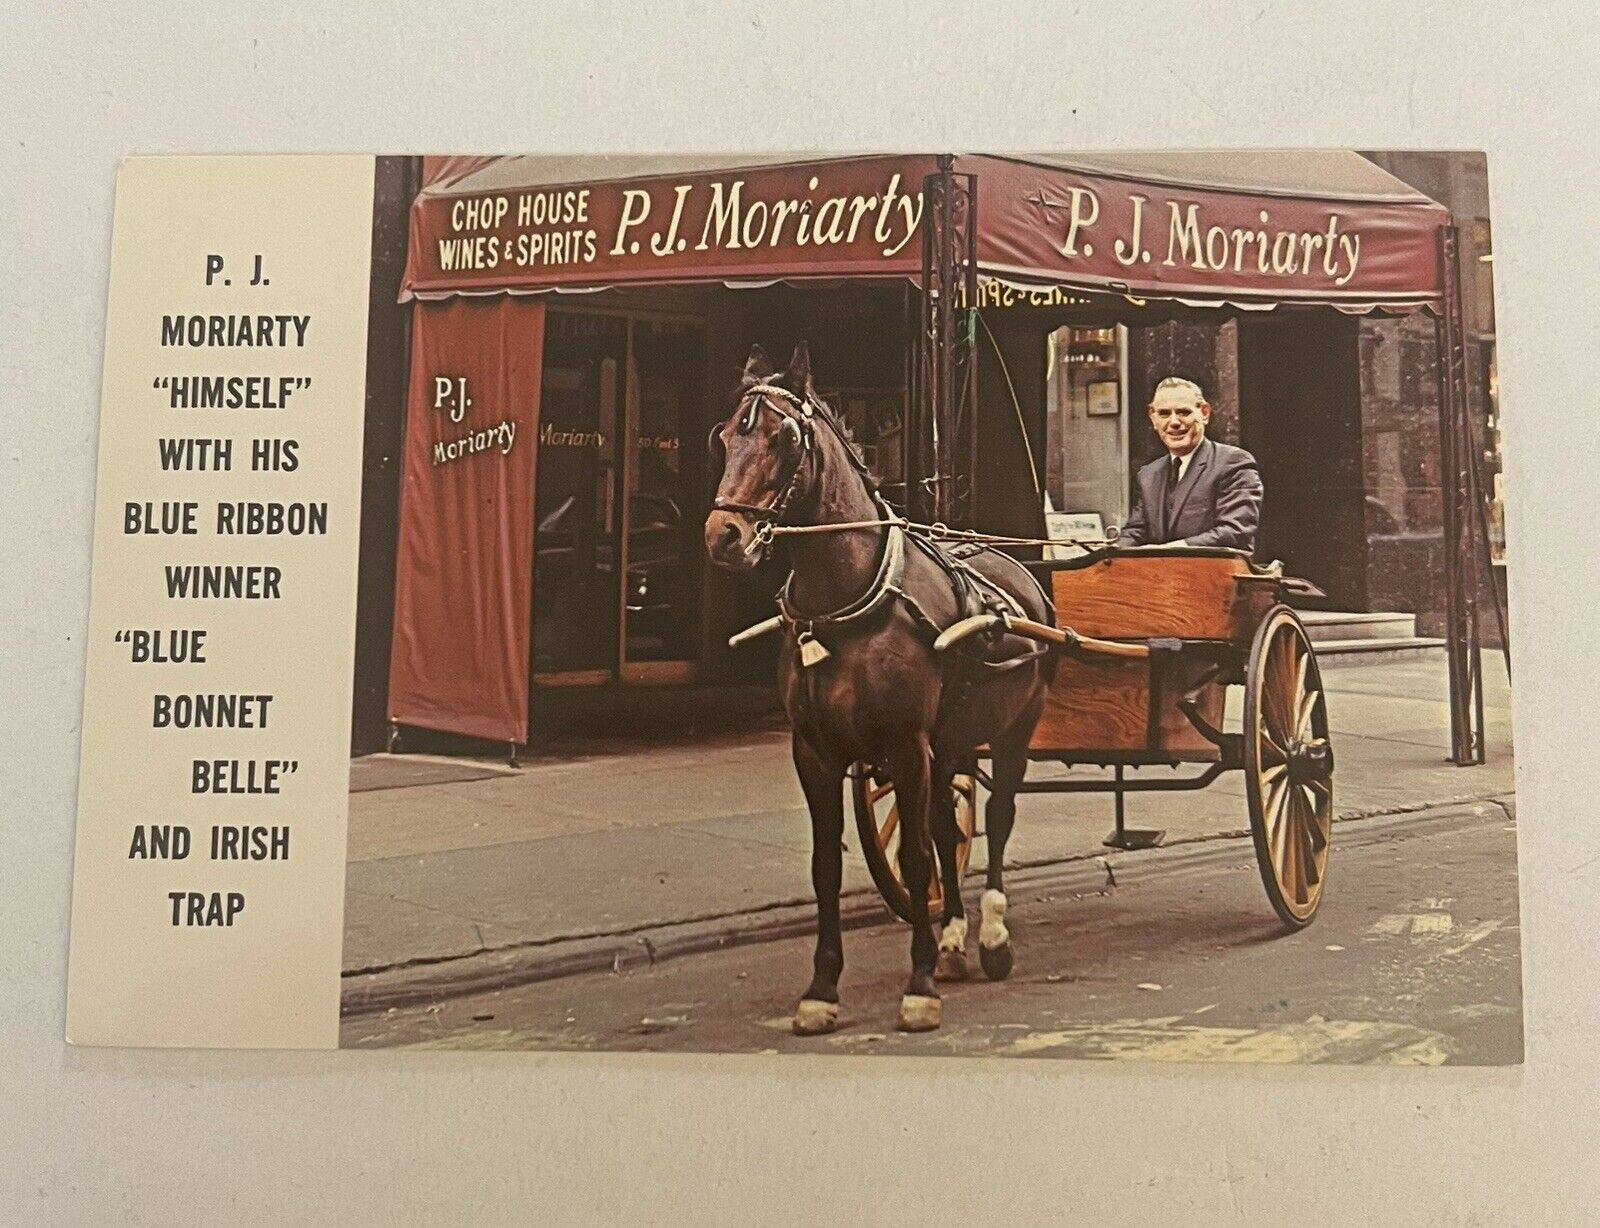 P. J. Moriarty Post Card